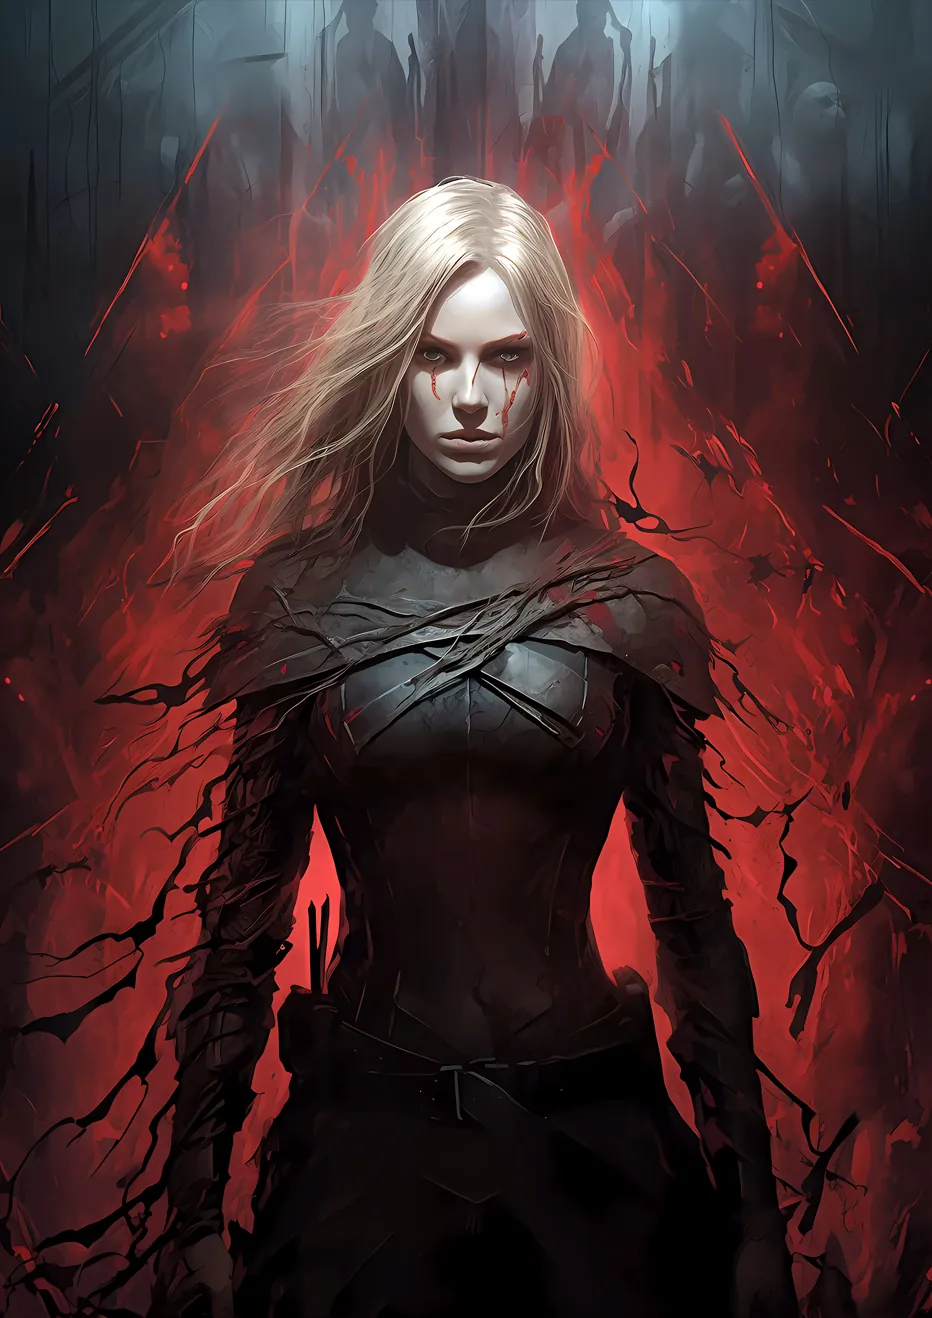 "Wicked Blaze" - A determined girl stands amidst swirling flames, her pale blond hair and scarred face illuminated by the fiery glow.